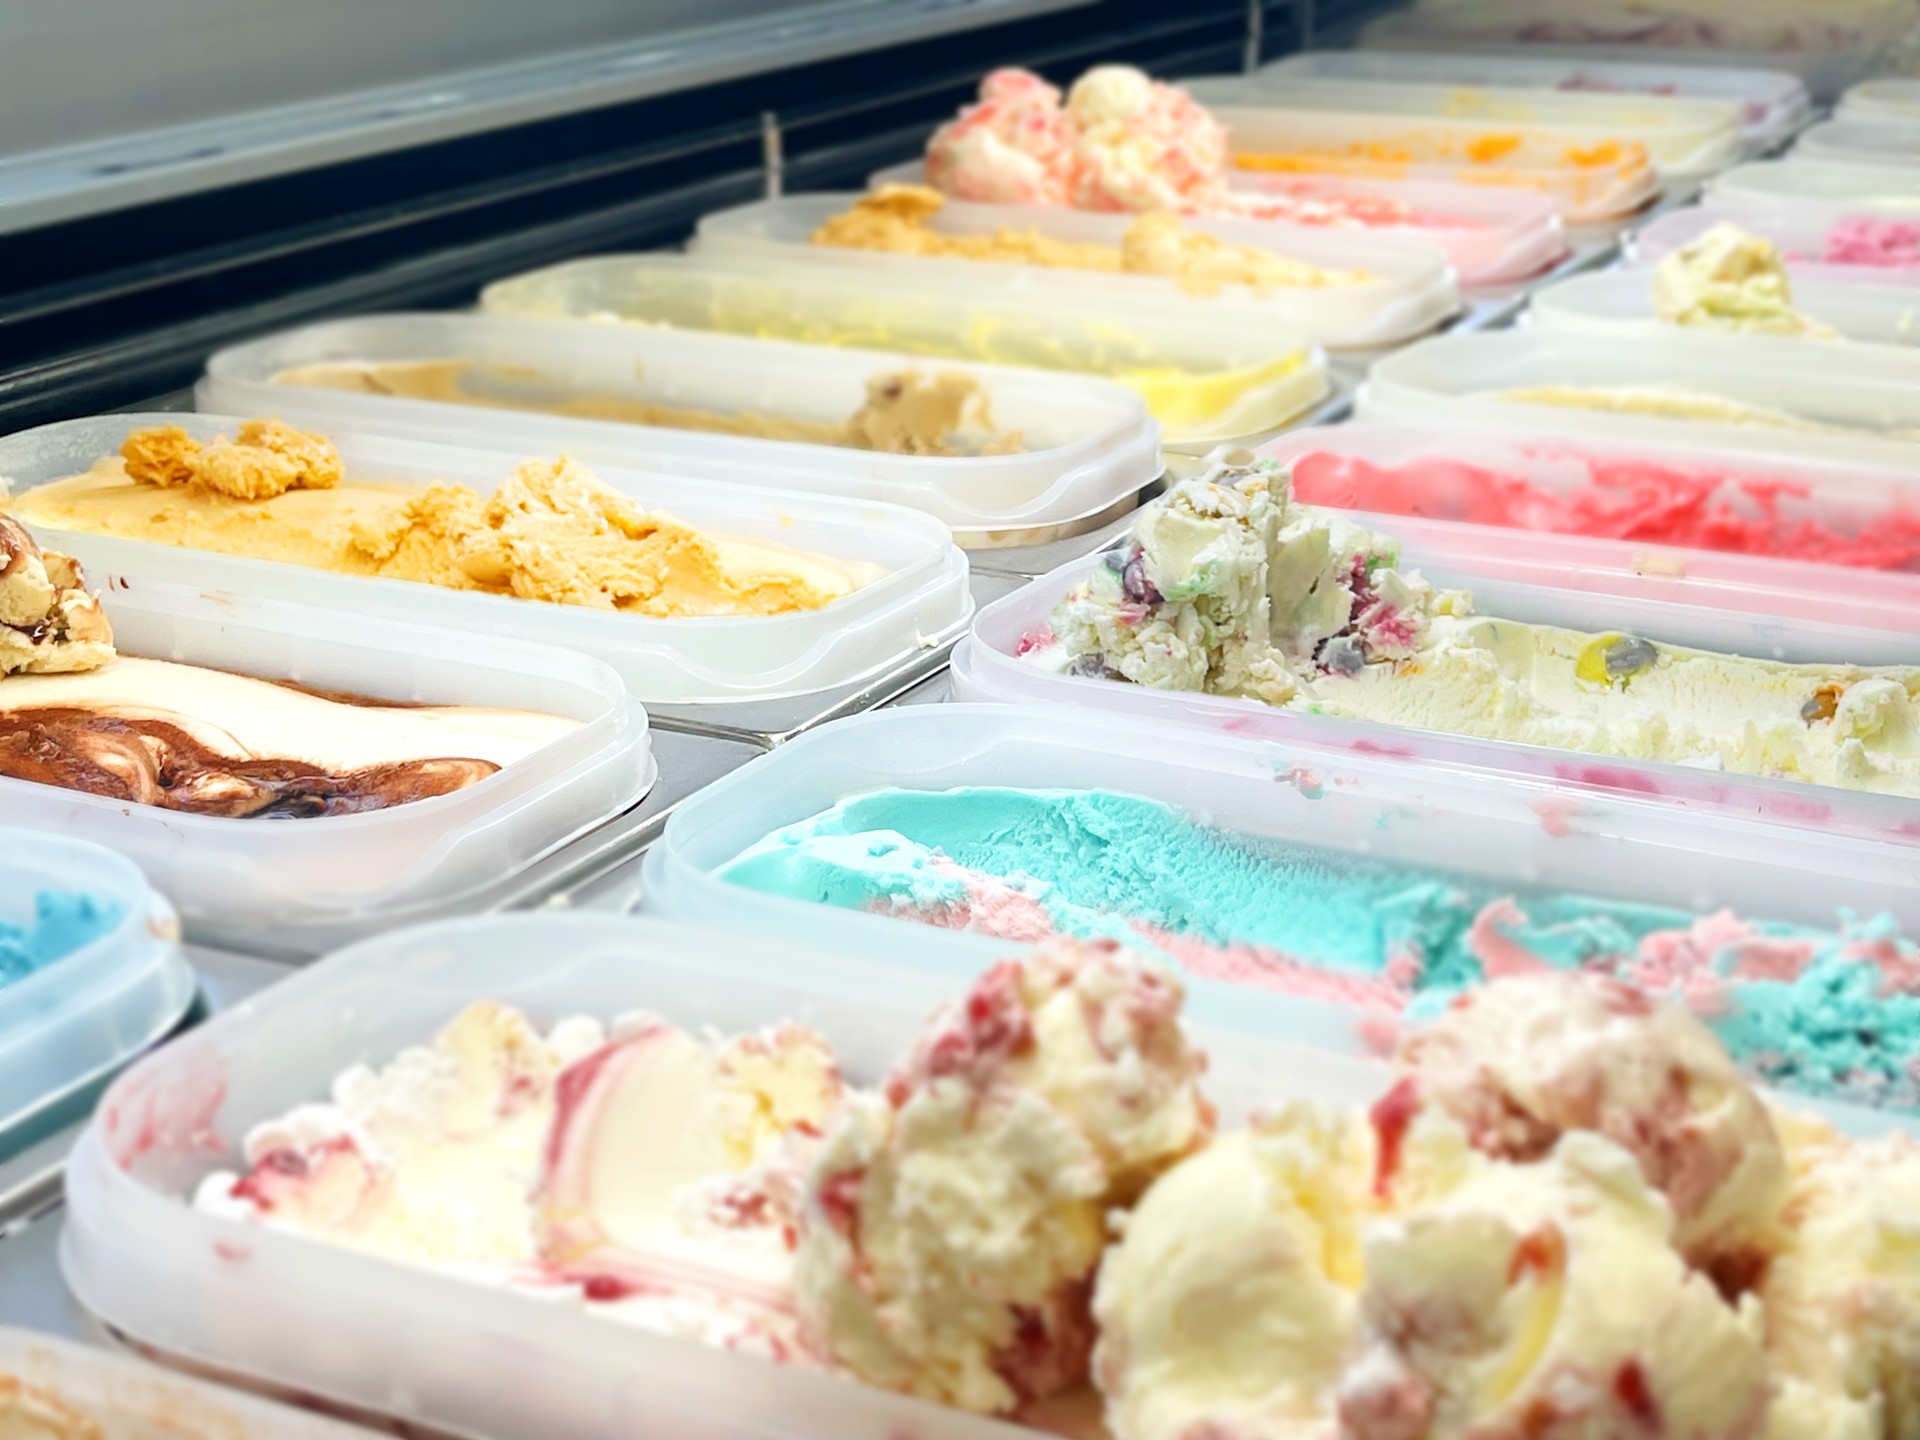 Picture showing part of the selection of Walling's Ice Cream that we offer at our Ice Cream Parlour.